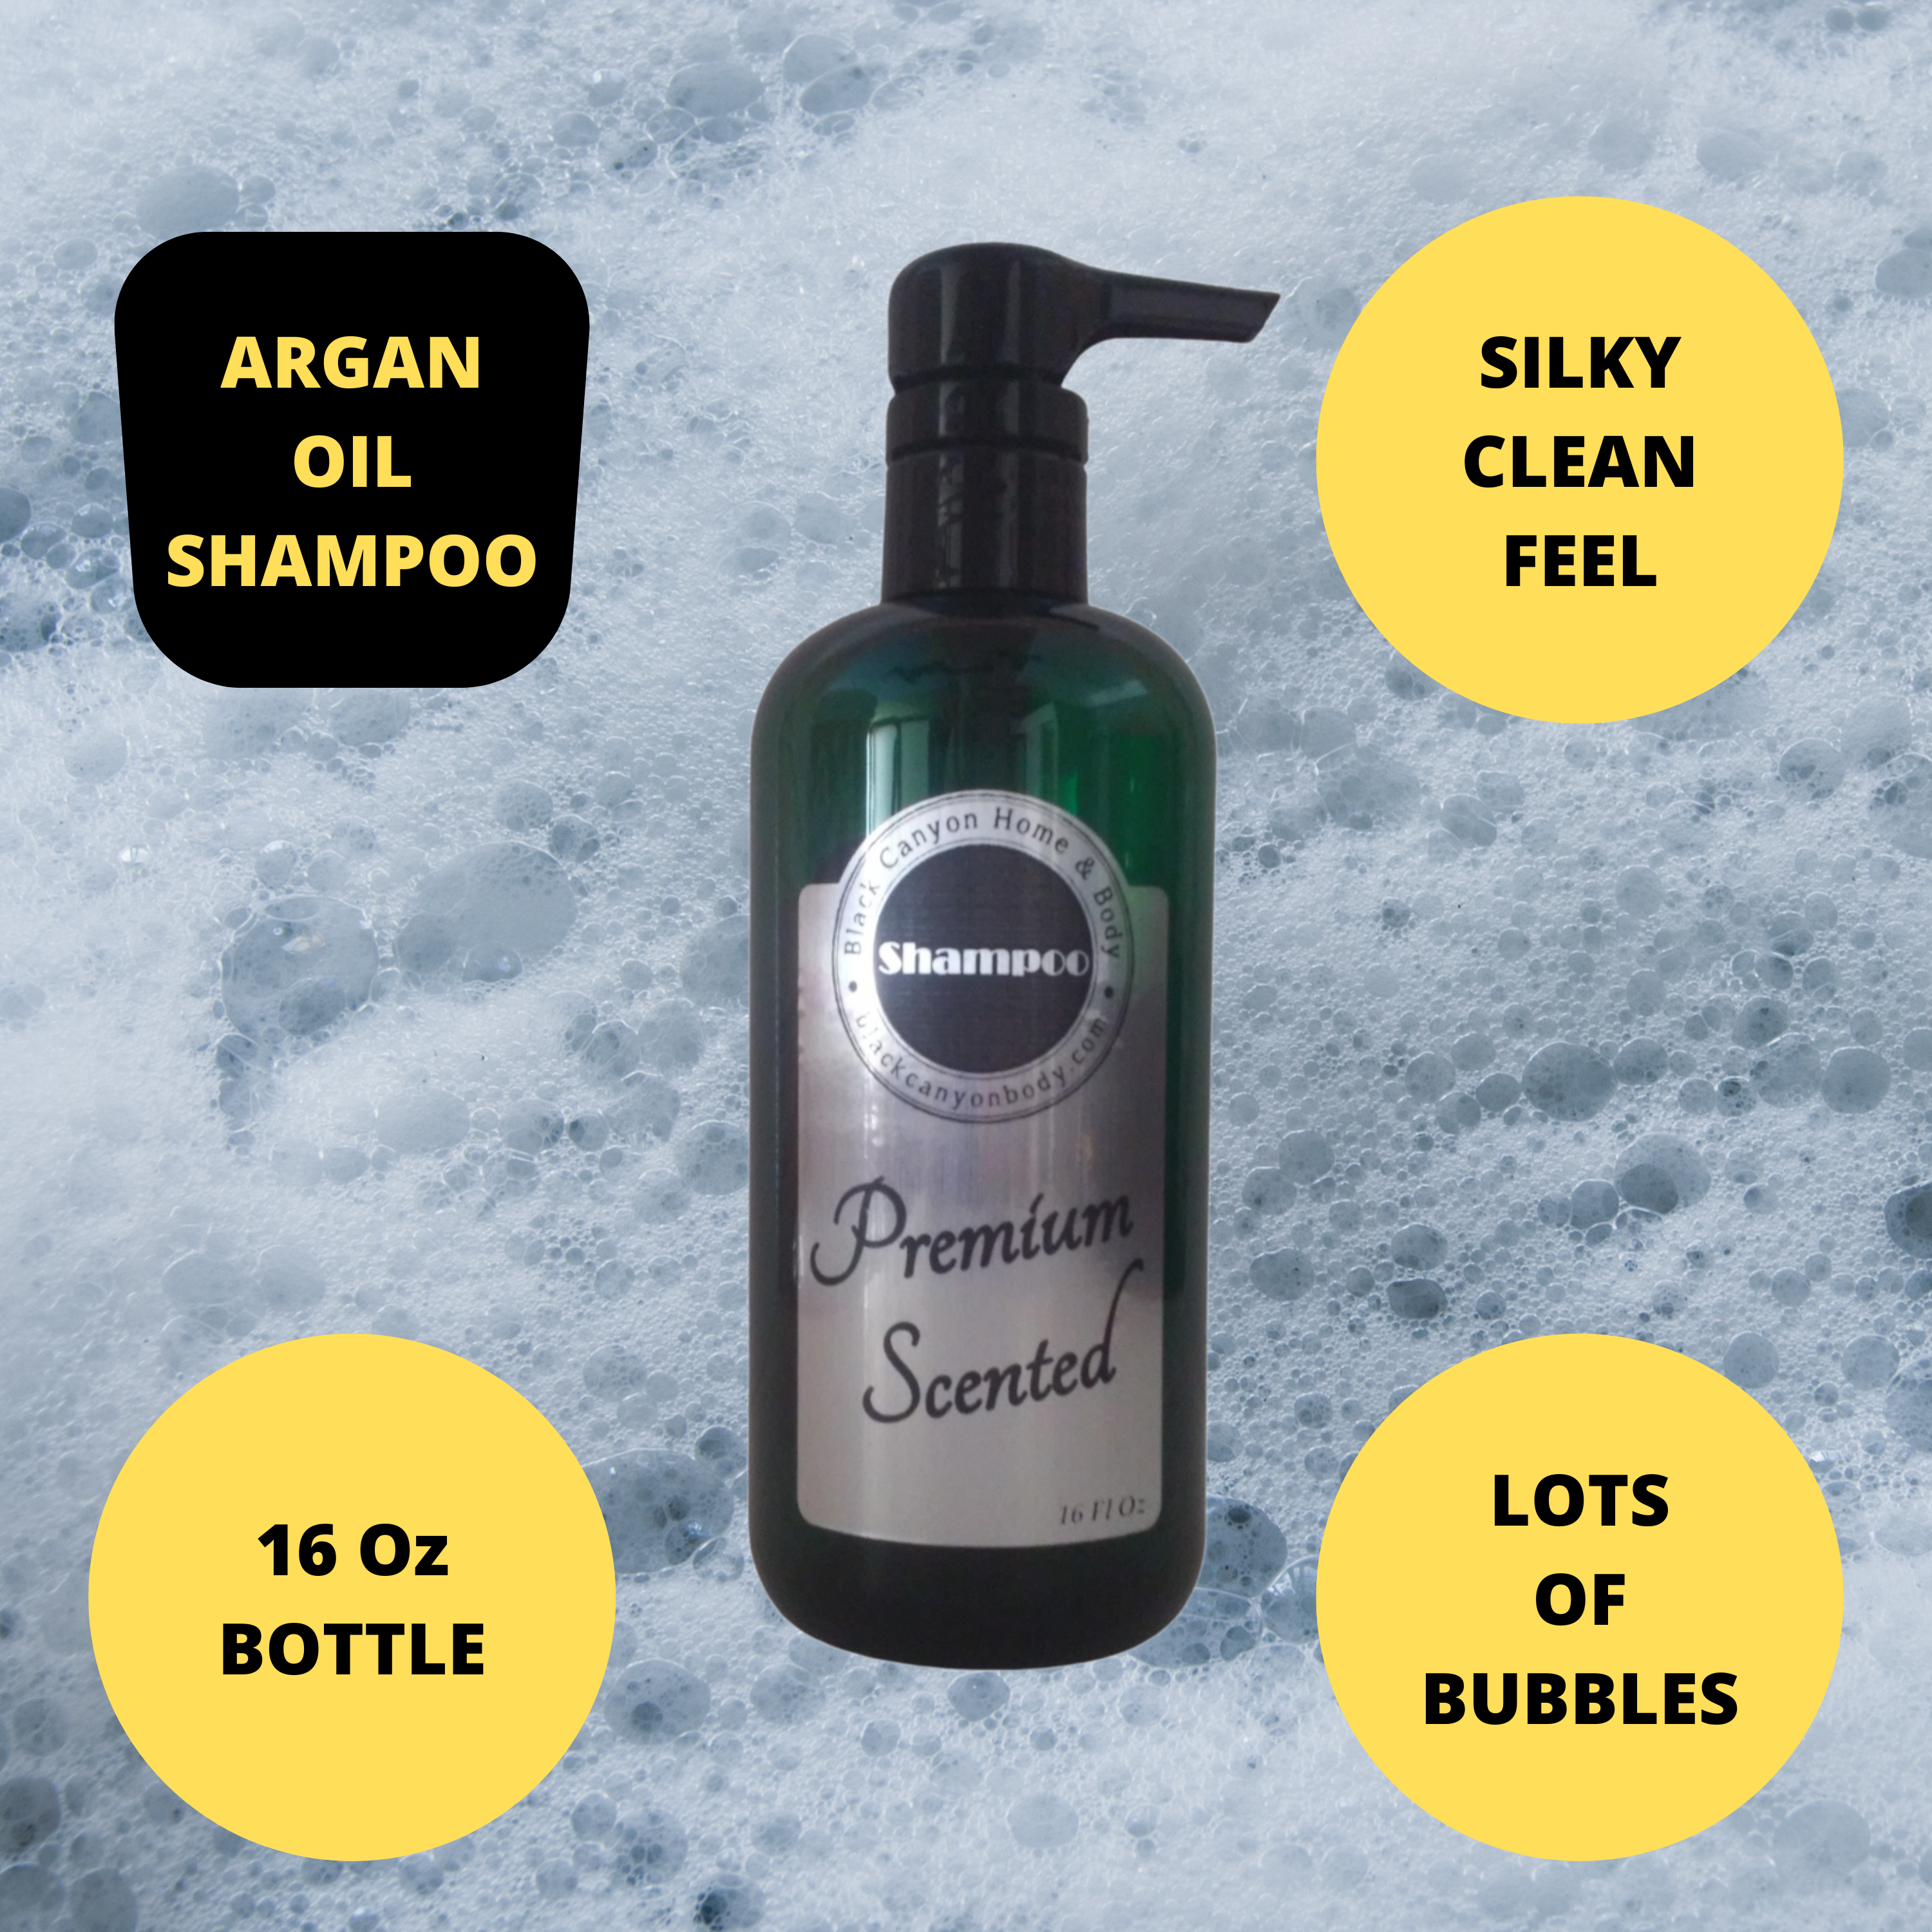 Black Canyon Black Currant & Cognac Scented Shampoo with Argan Oil